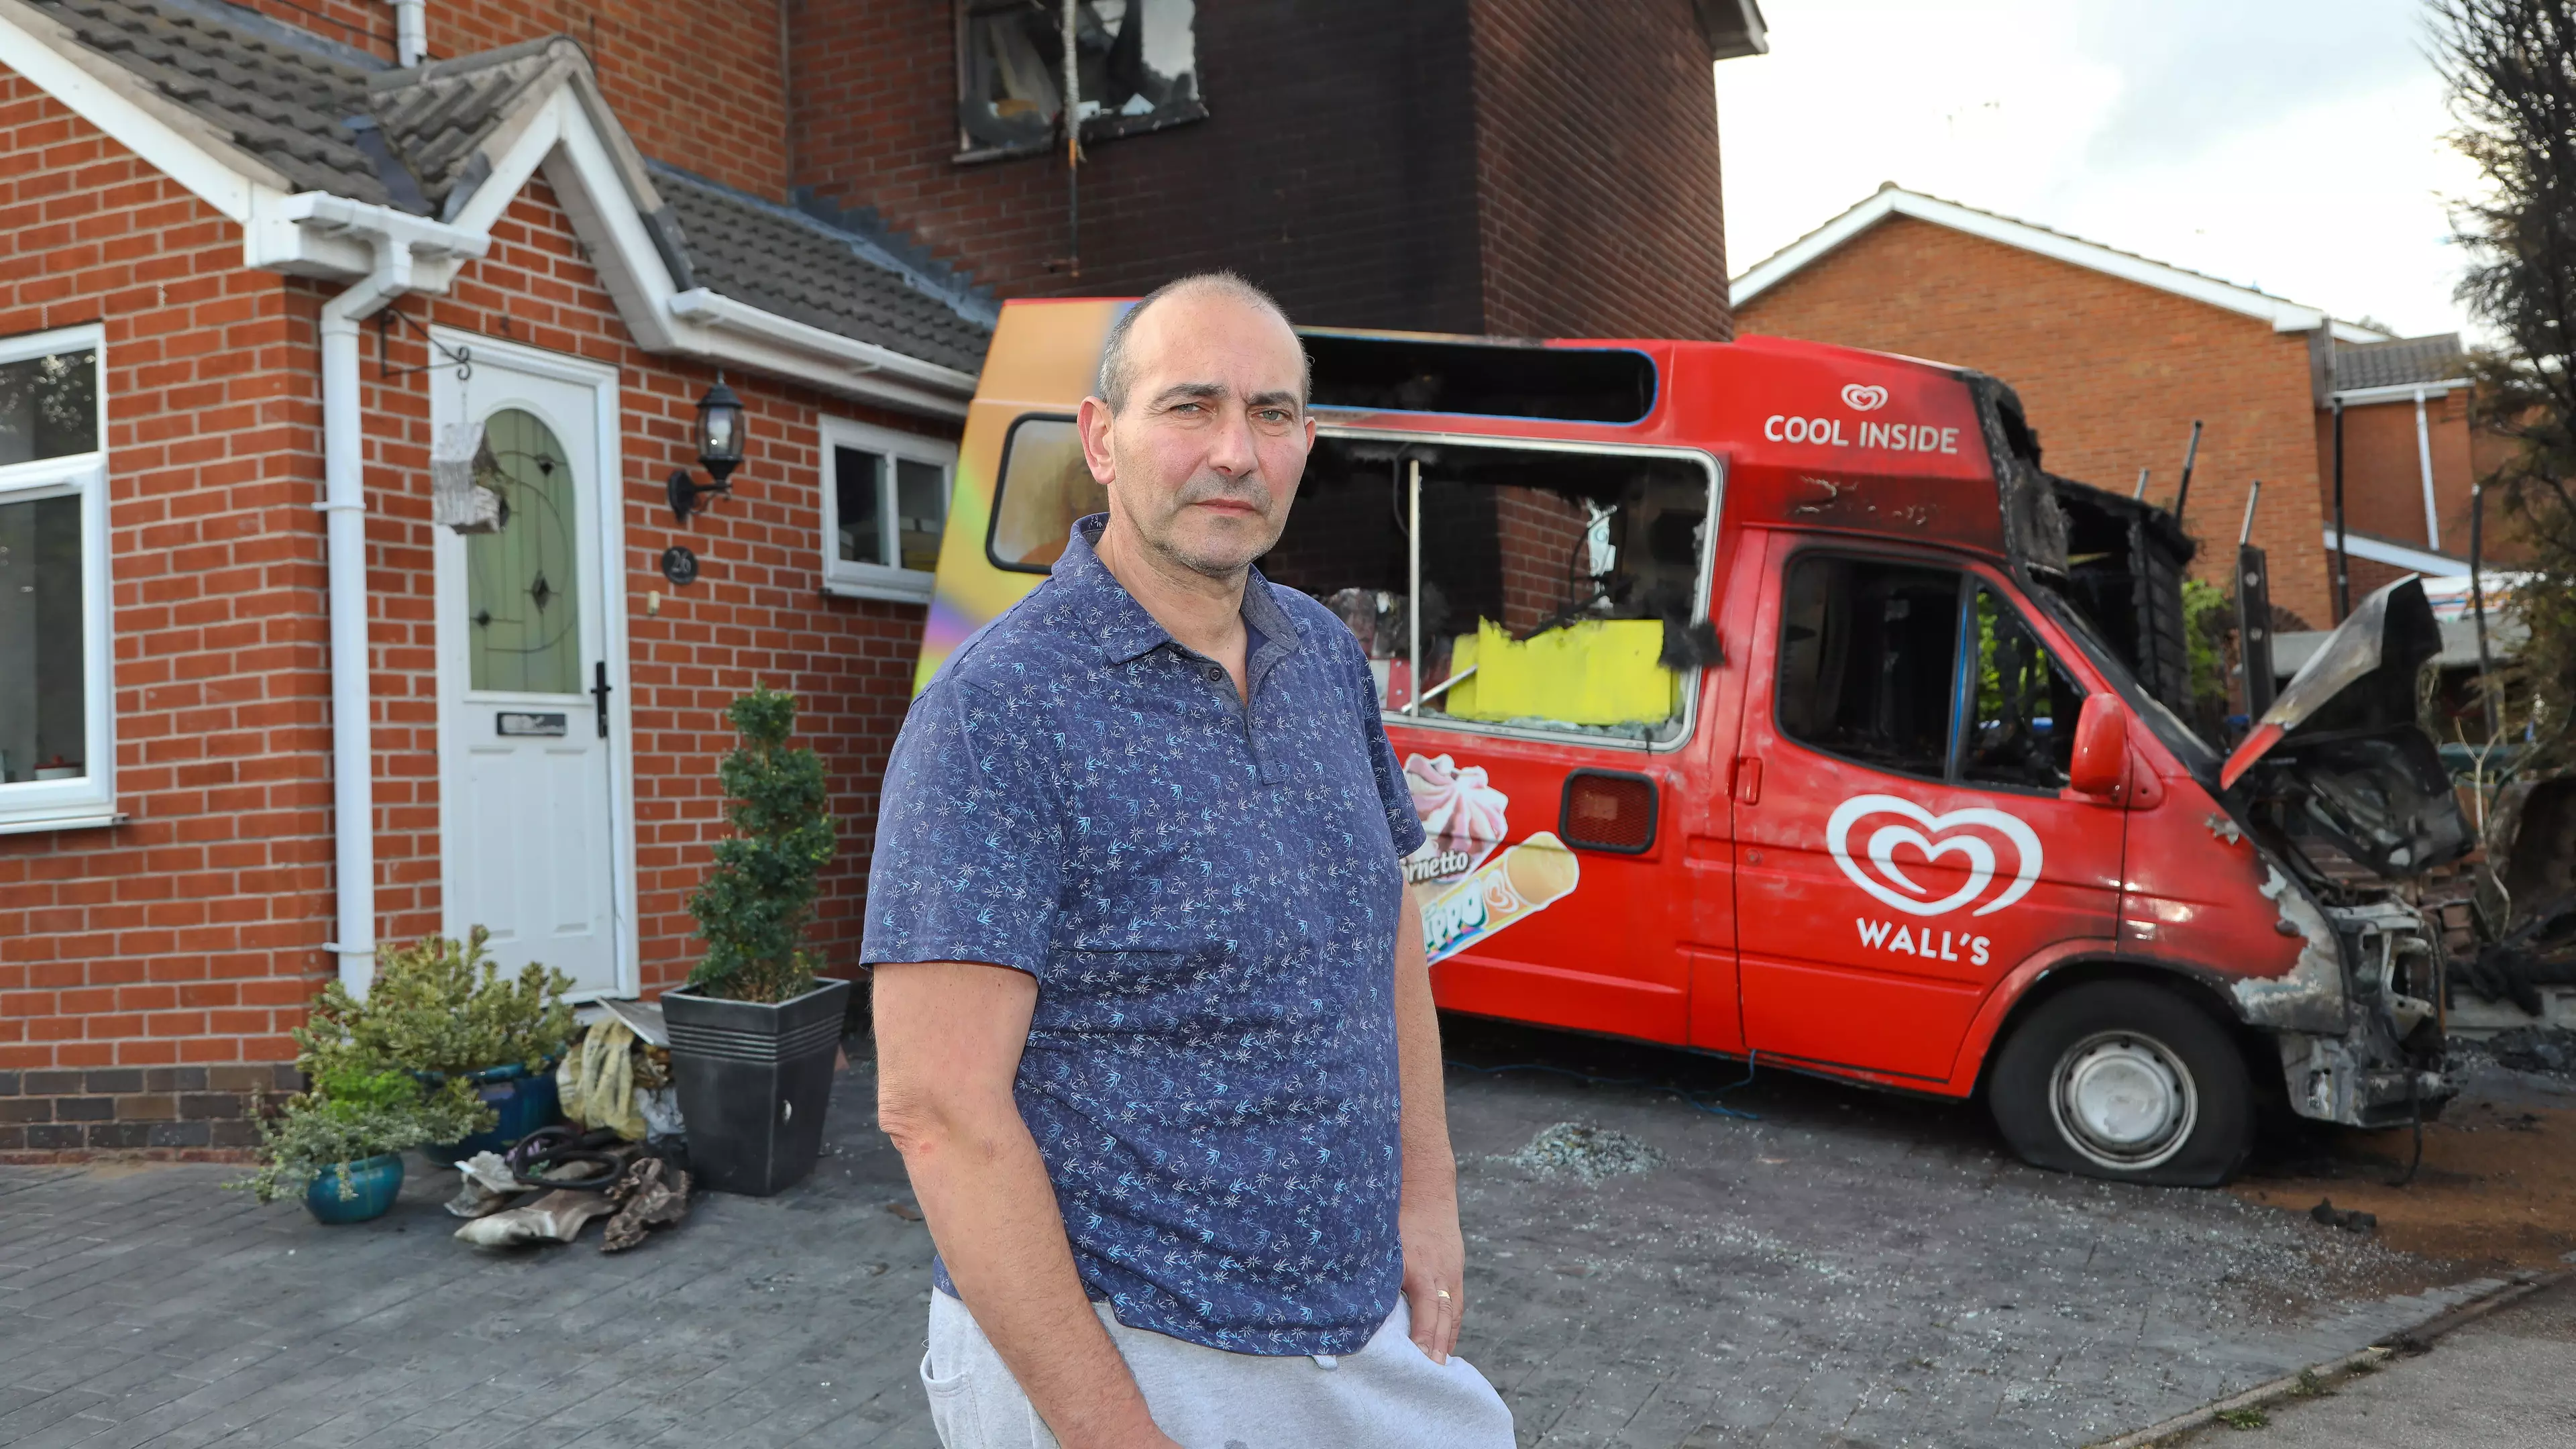 Ice Cream Seller Loses Thousands After Arsonists Torch Two Vans In Bitter Turf War